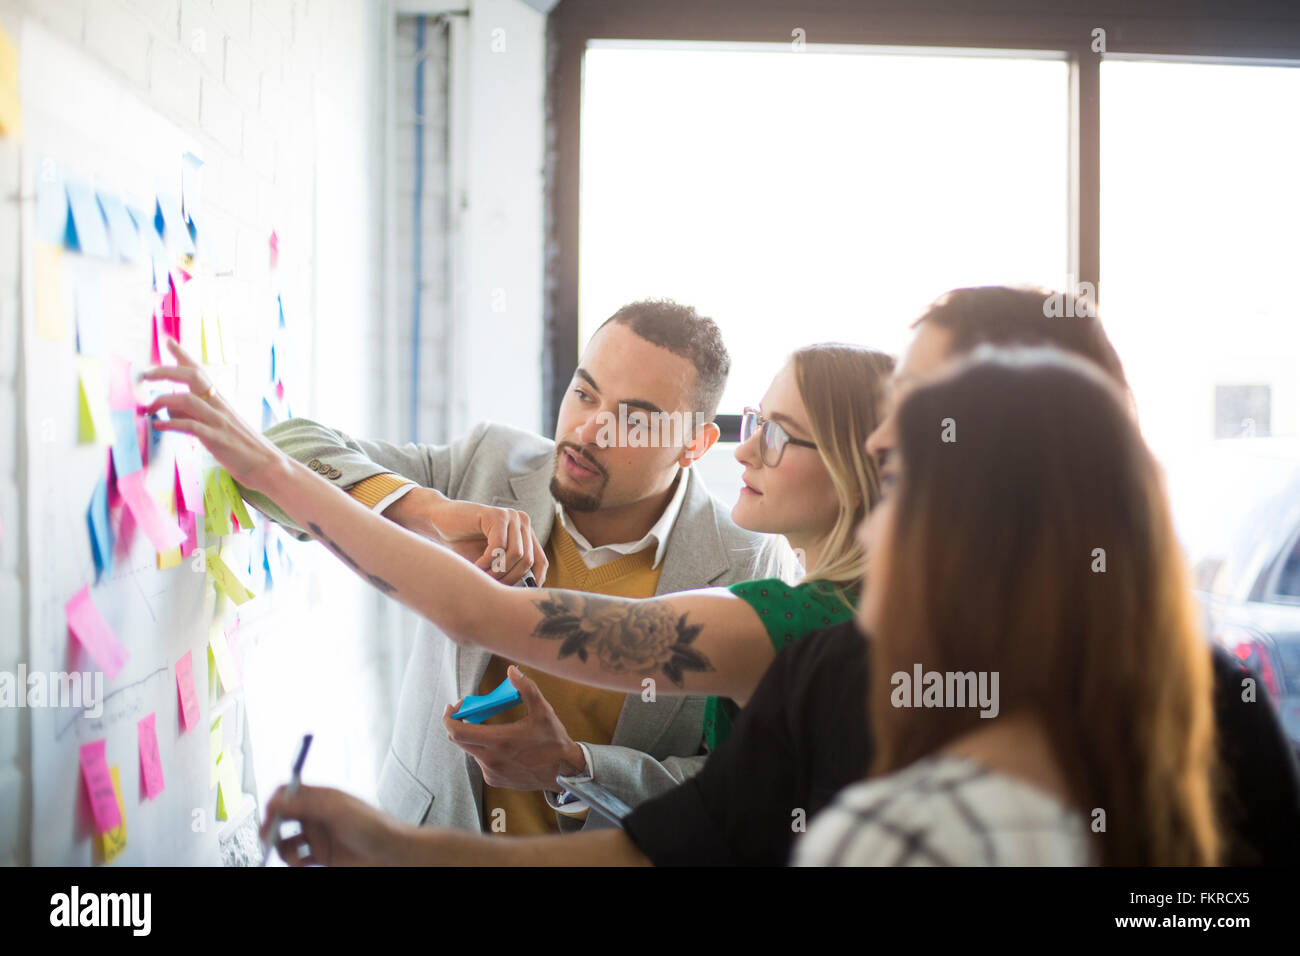 Business people using adhesive notes in office Stock Photo